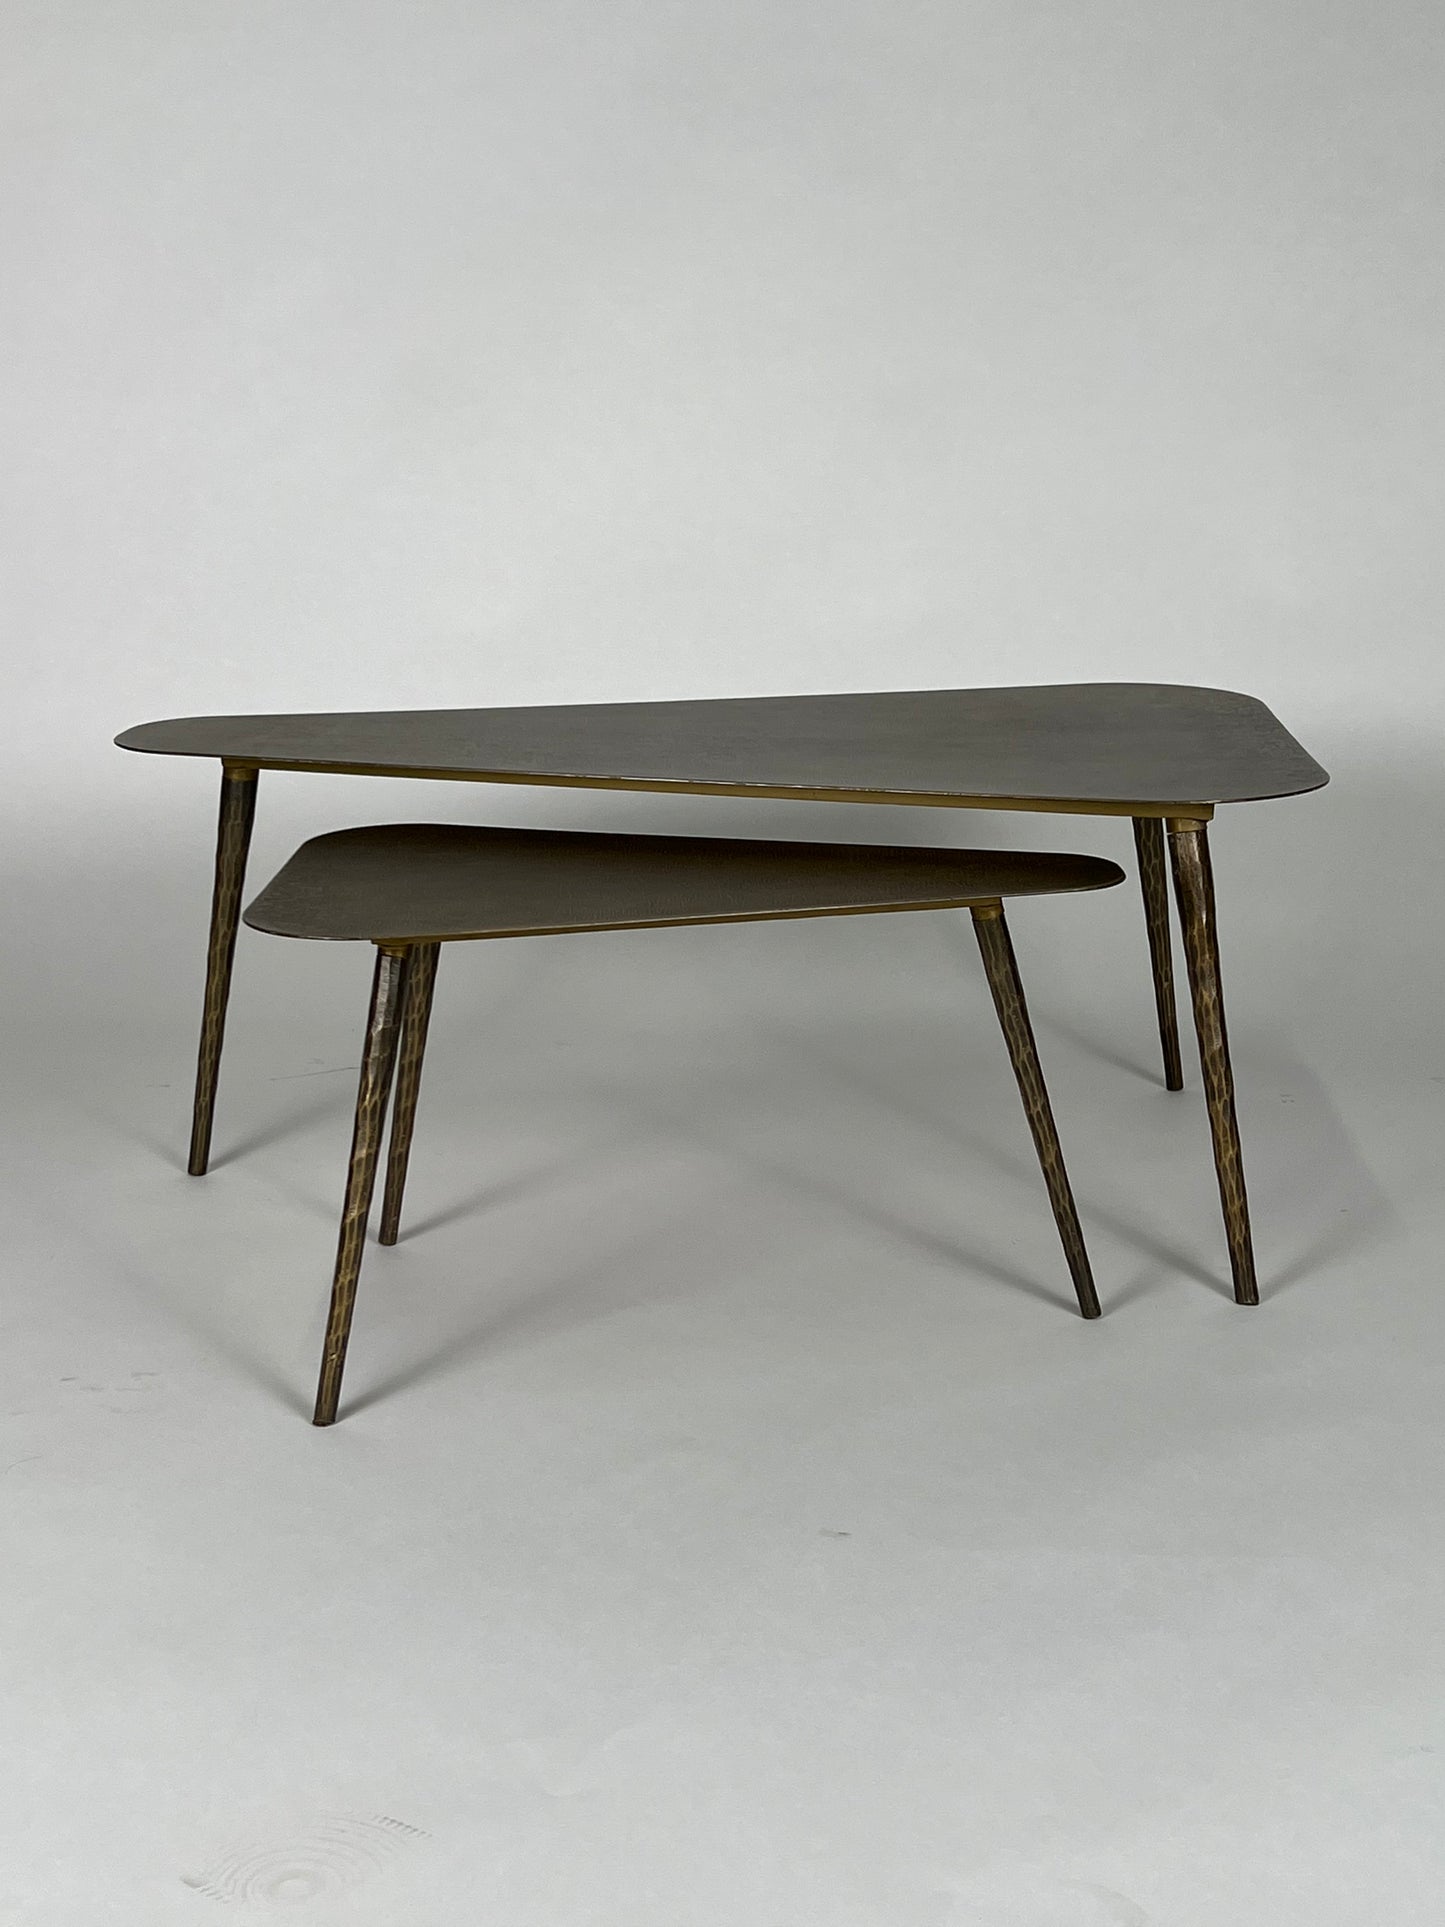 Nesting triangle coffee tables / side tables